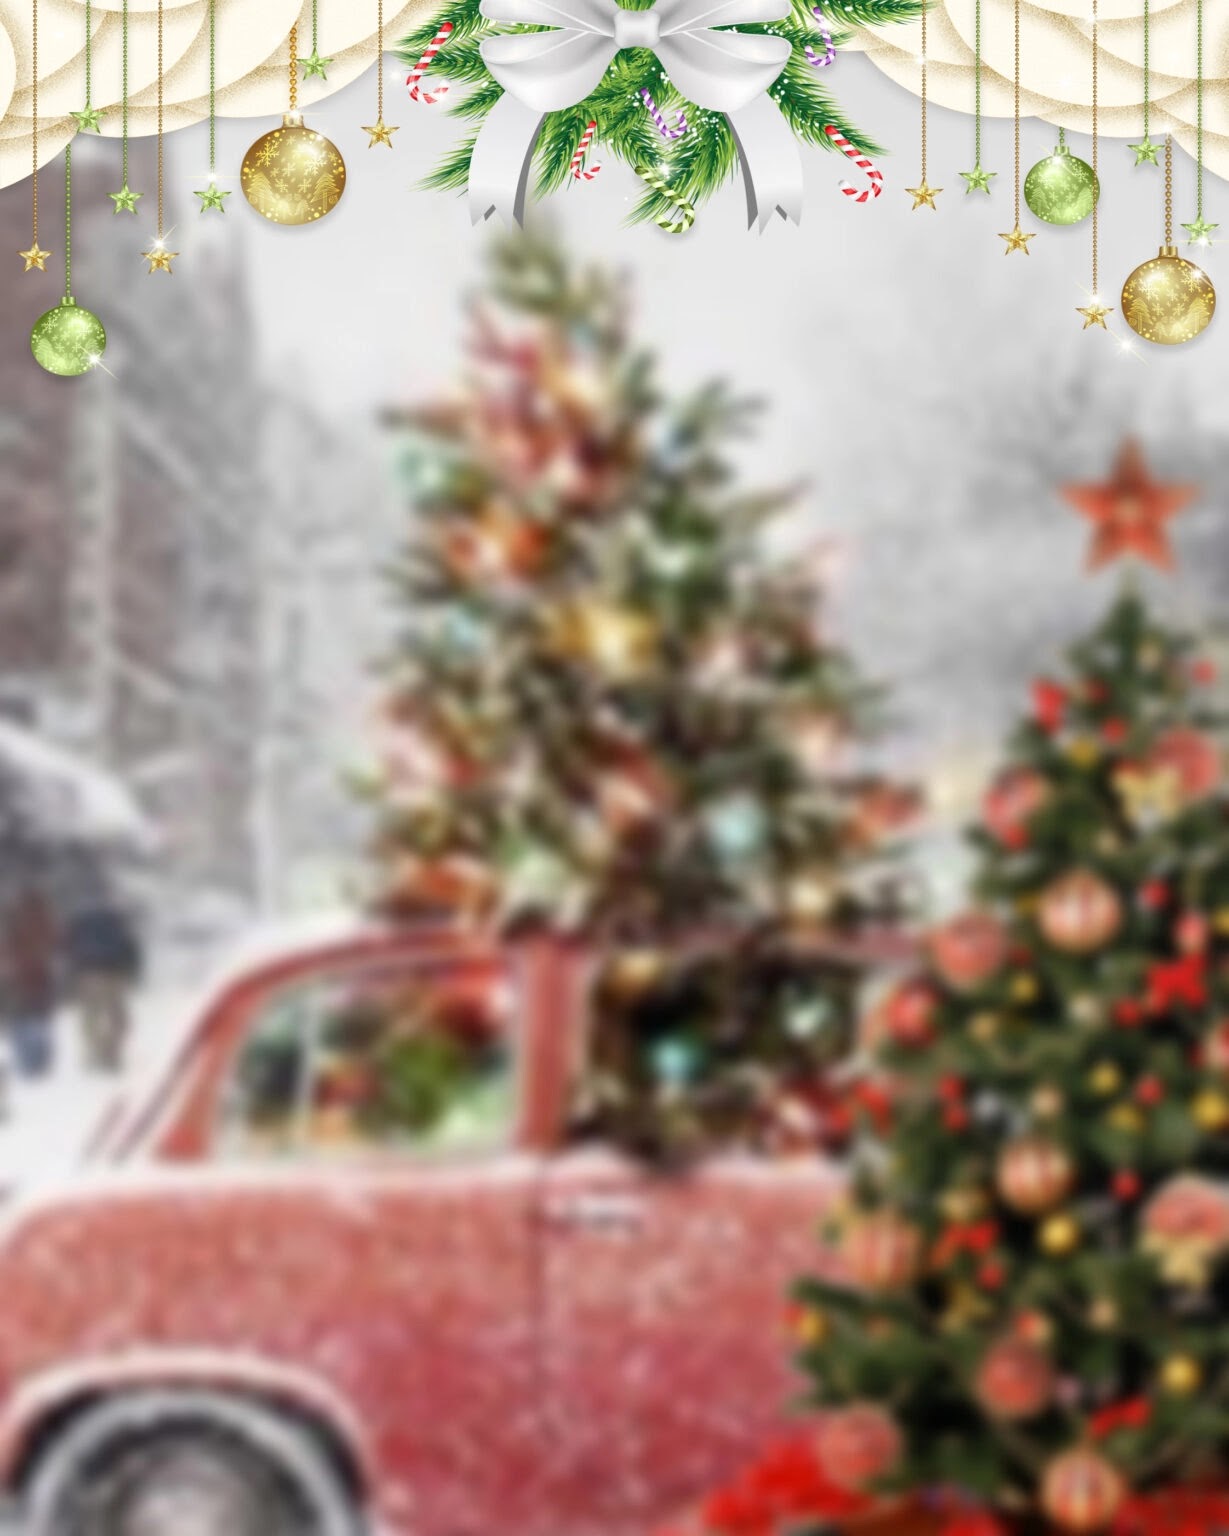 500+ Merry Christmas Hd Background Images for Editing Picsart AJ editing zone